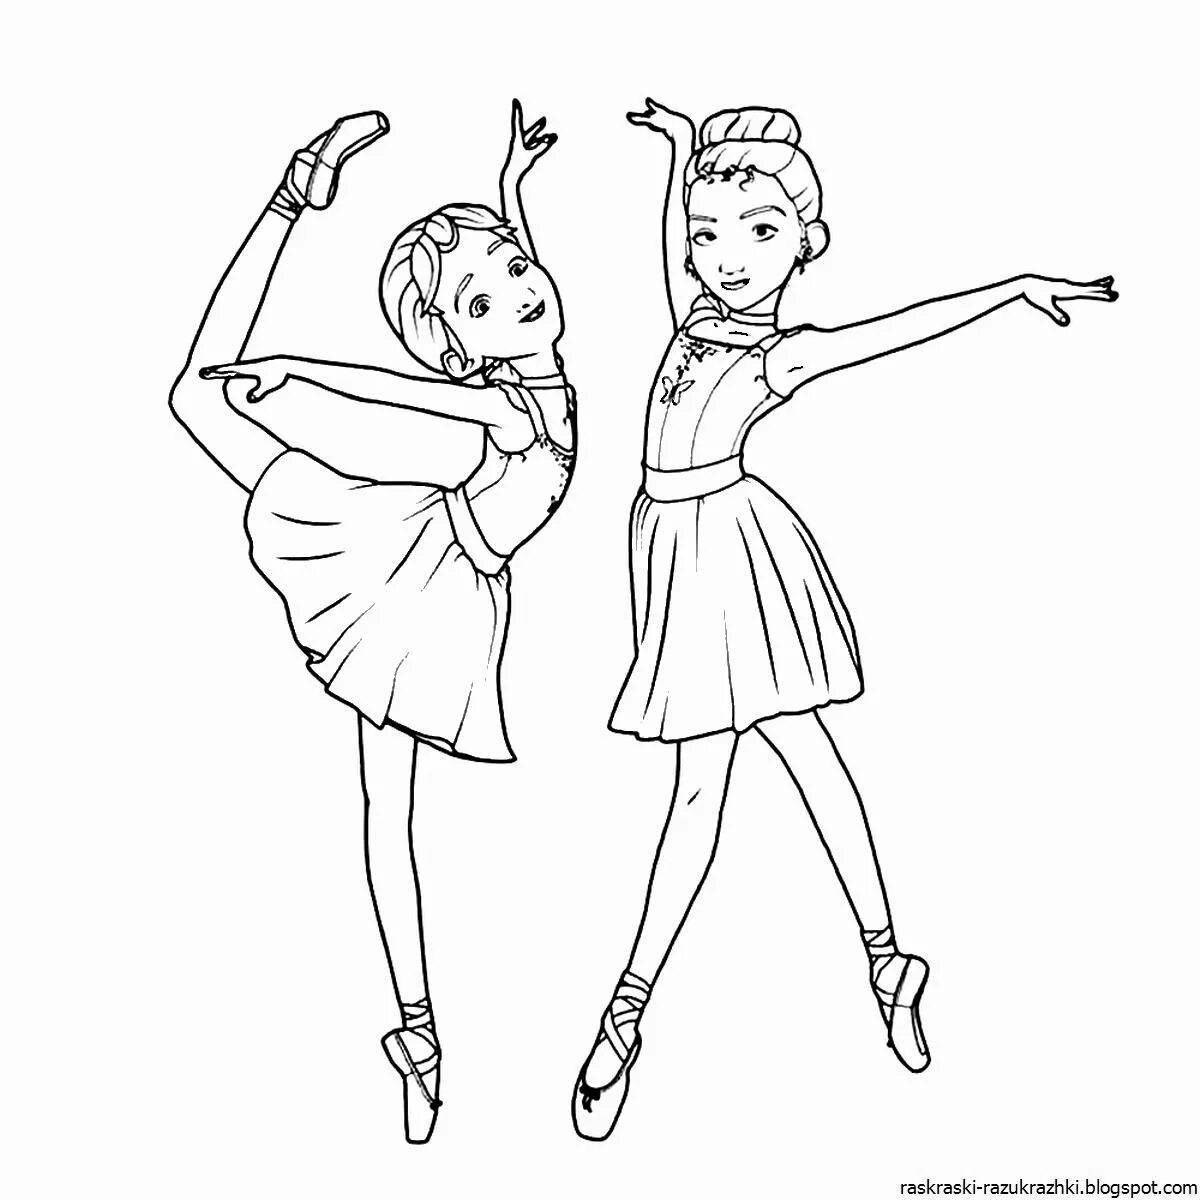 Coloring page playful dancing girl